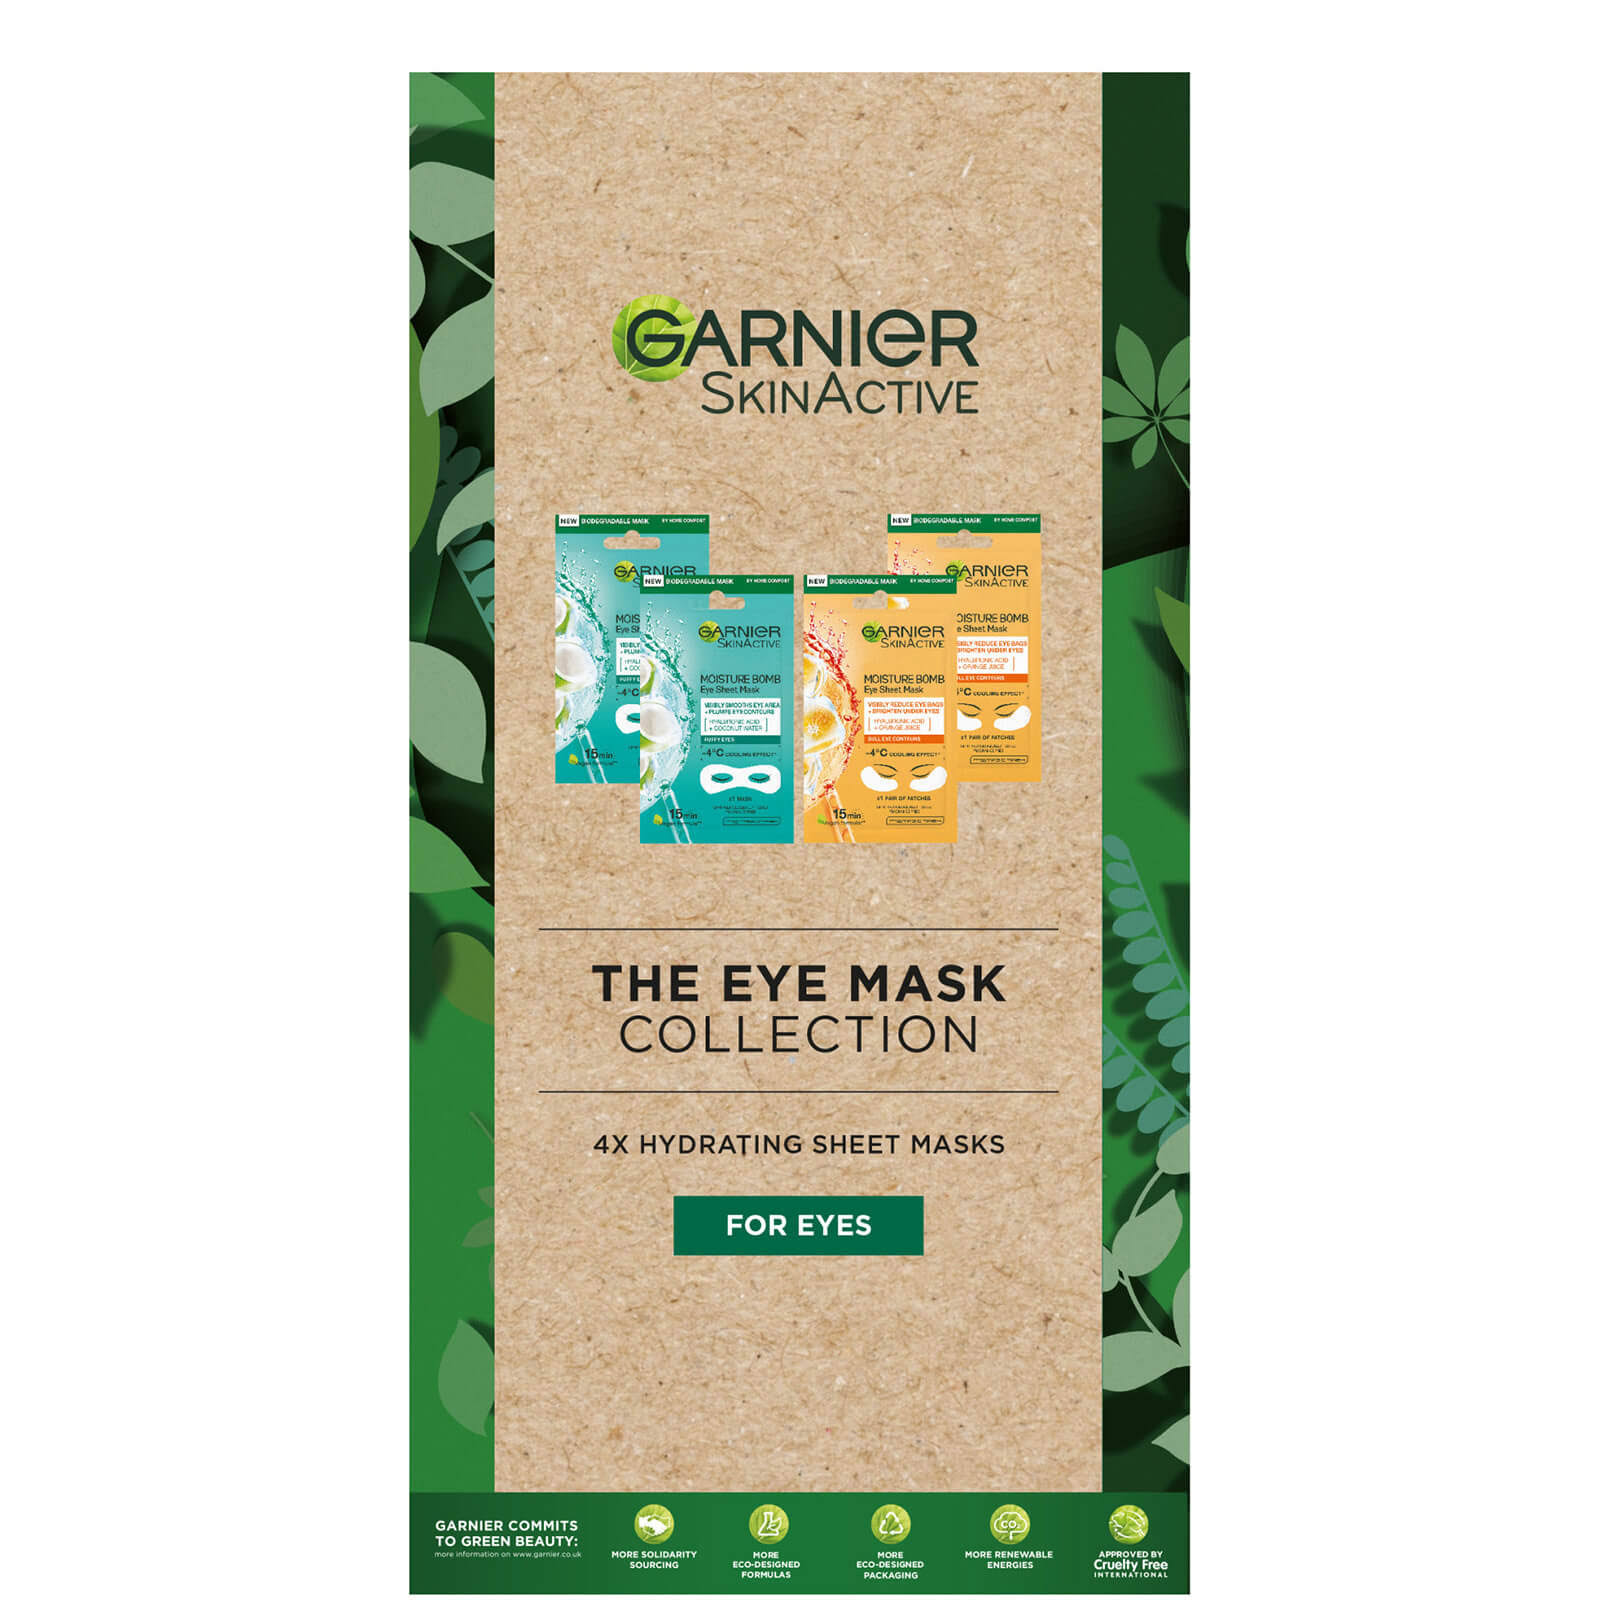 Garnier Skin Active The Eye Mask Collection Gift Set with 4 Hydrating